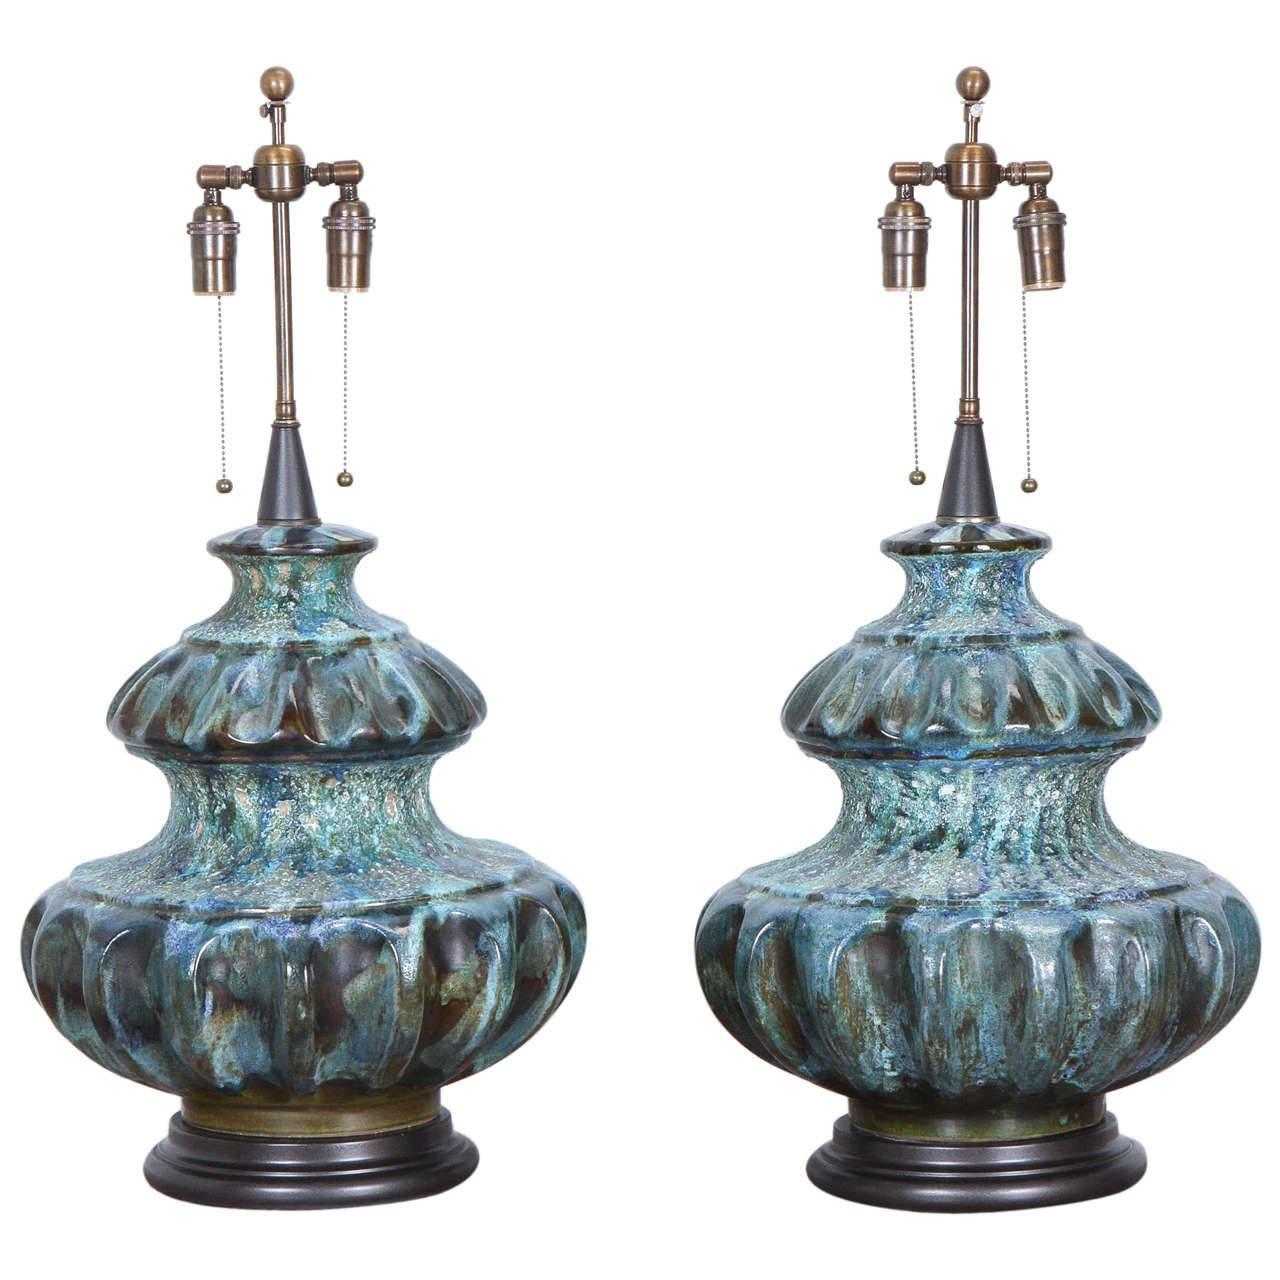 Spectacular Pair of Ceramic Lamps with a Volcanic Glaze